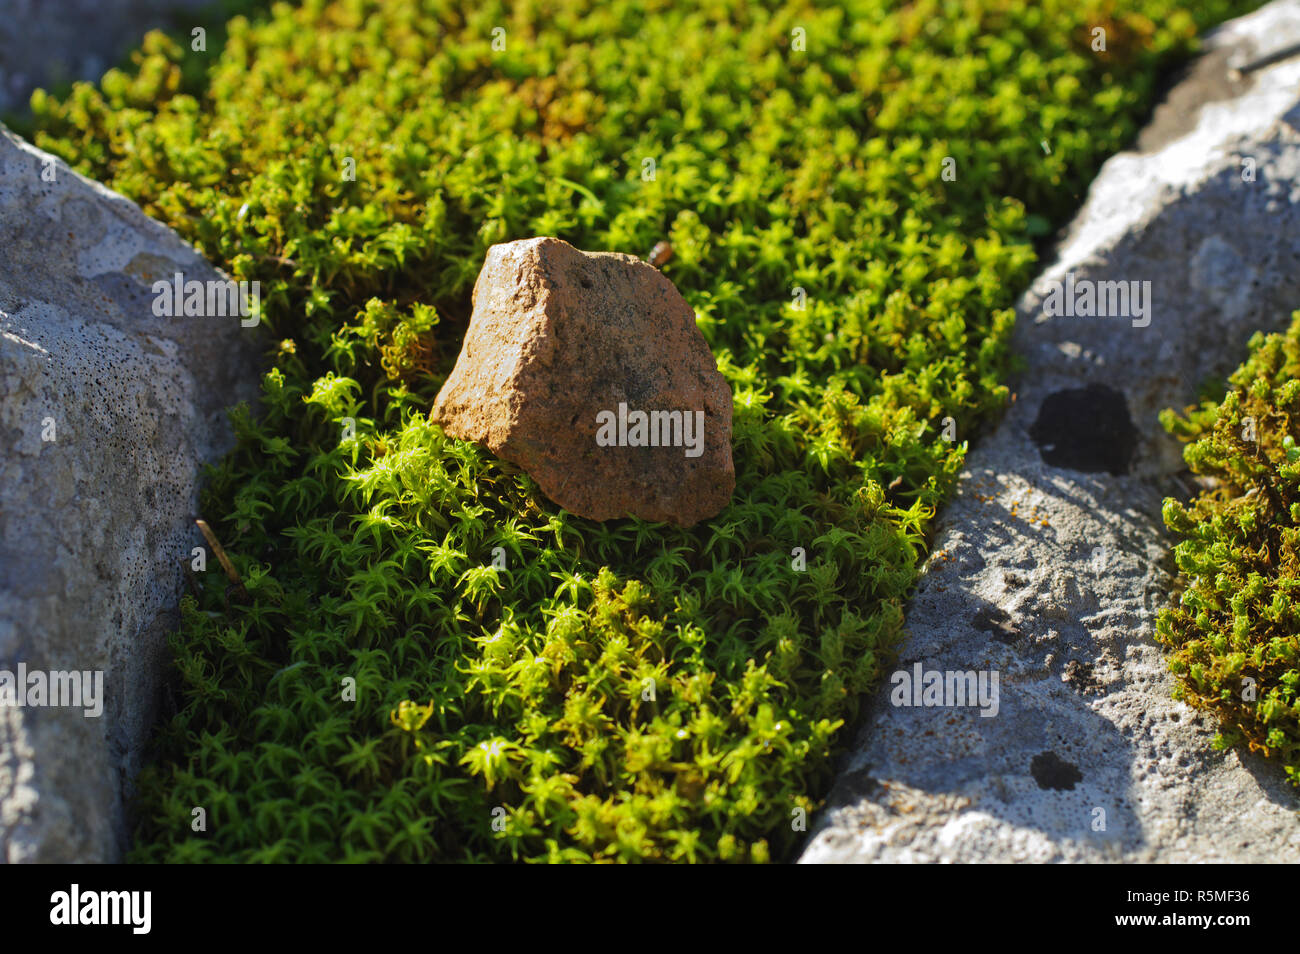 mosses one and between stones Stock Photo